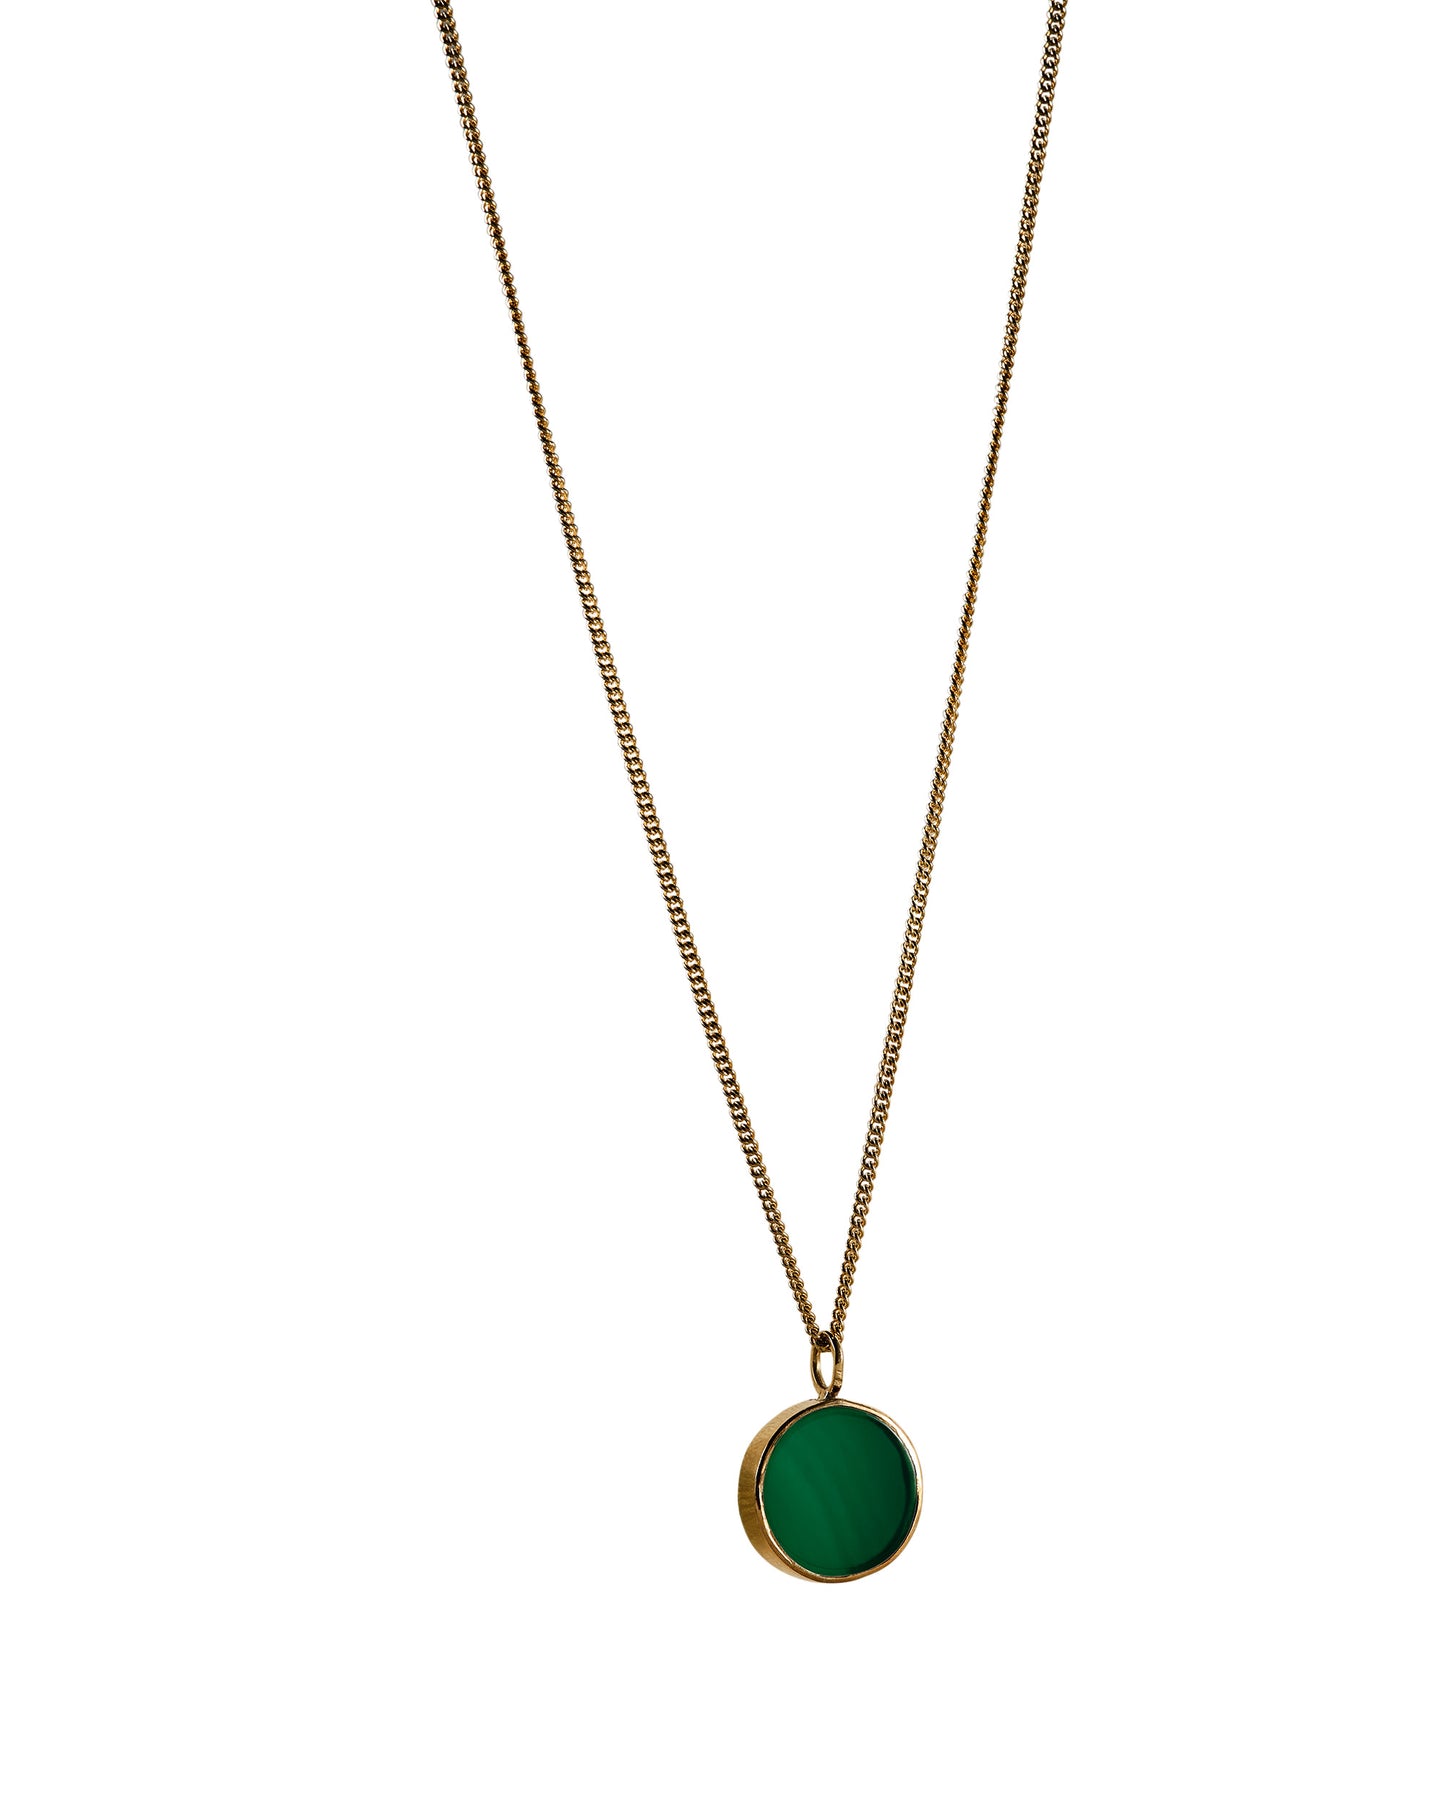 green disc and gold pendant necklace - agate